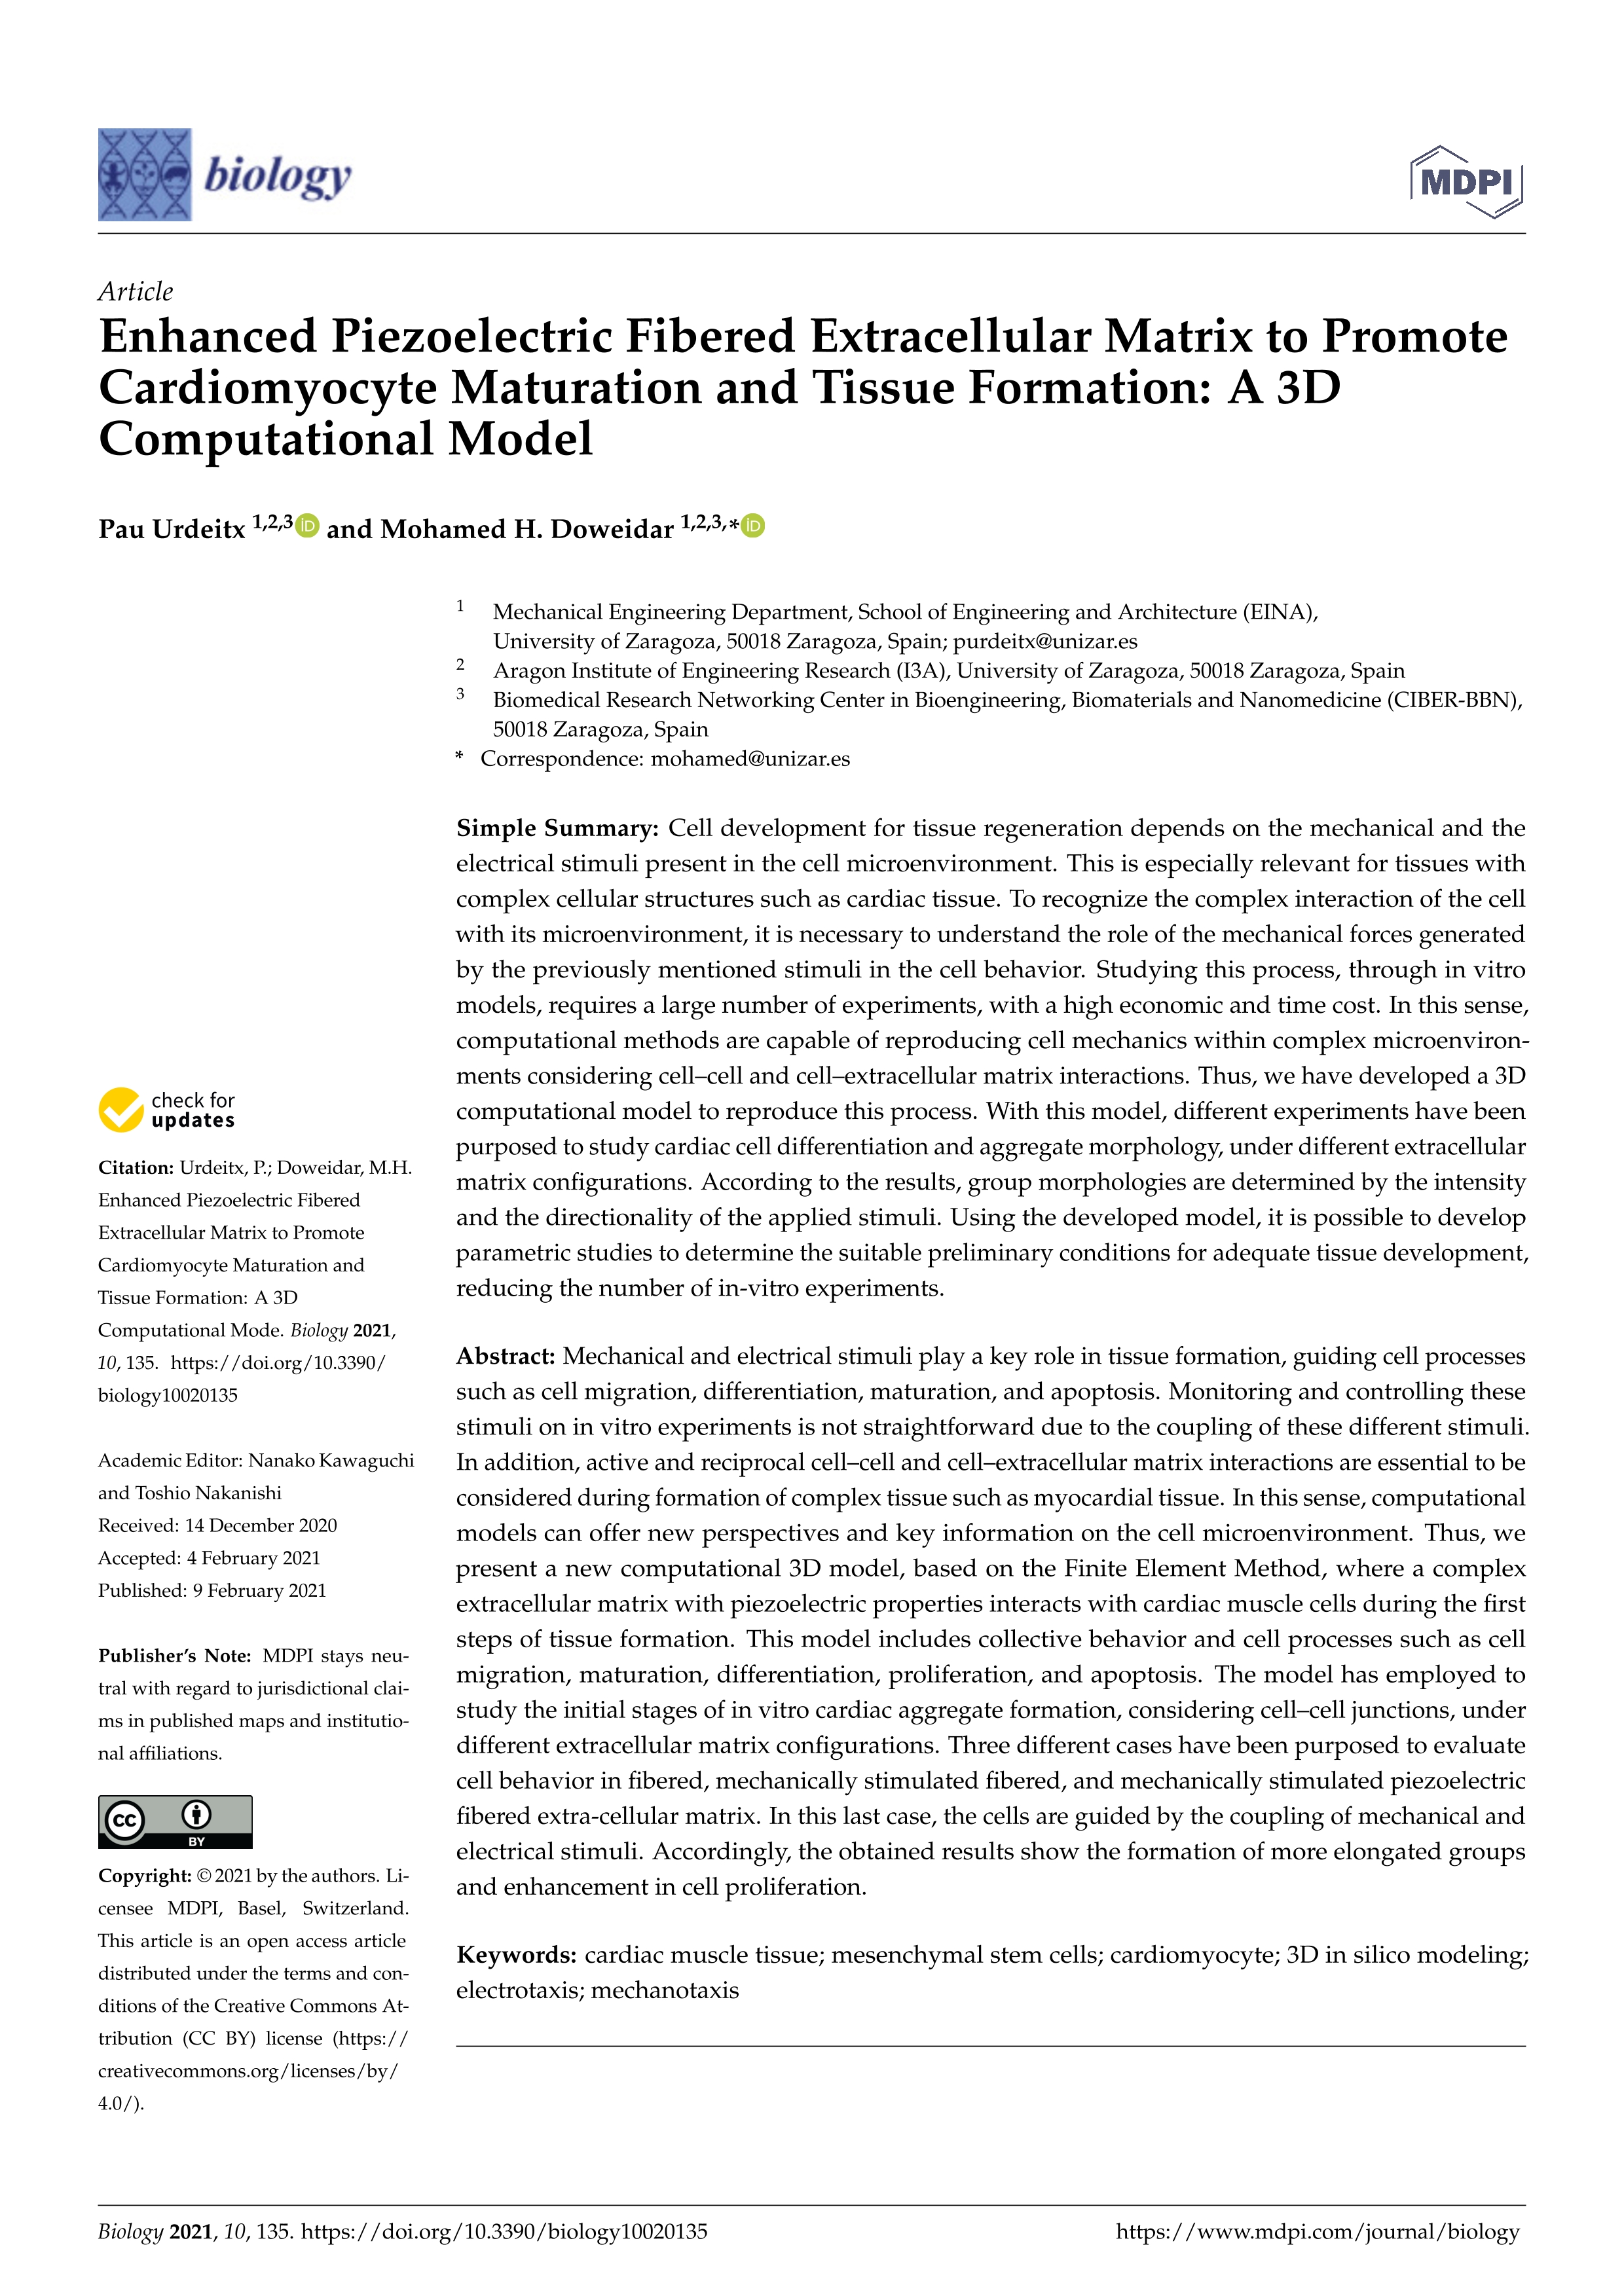 Enhanced piezoelectric fibered extracellular matrix to promote cardiomyocyte maturation and tissue formation: a 3d computational model